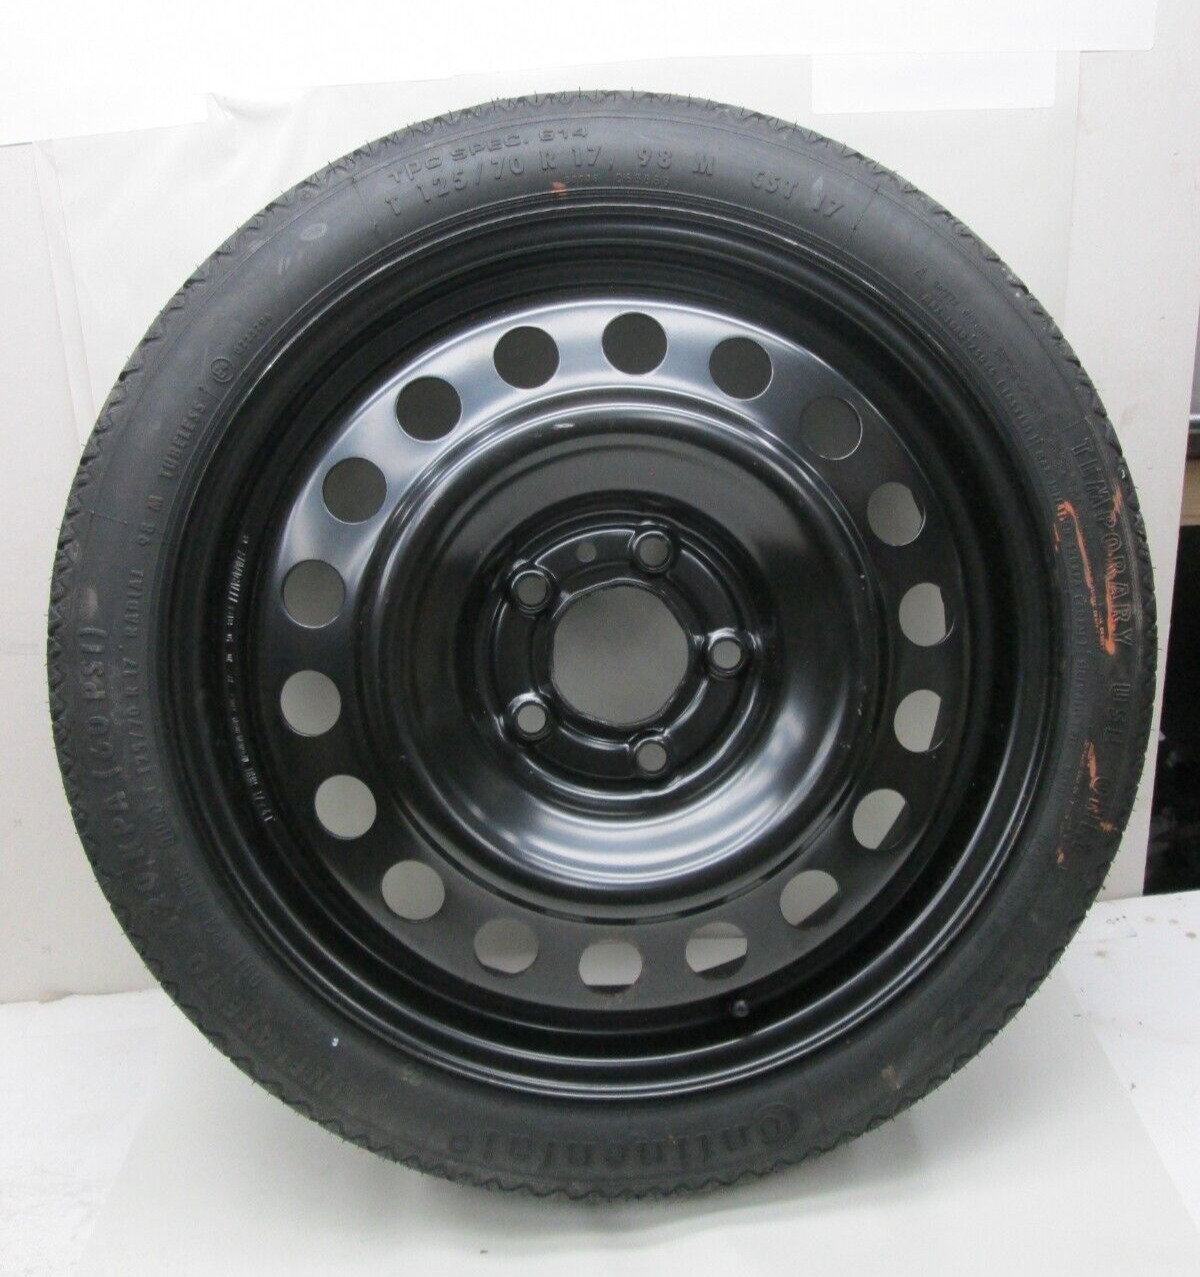 06 07 08 09 10 11 DTS LUCERNE 17 INCH COMPACT SPARE TIRE DONUT T125/70/17